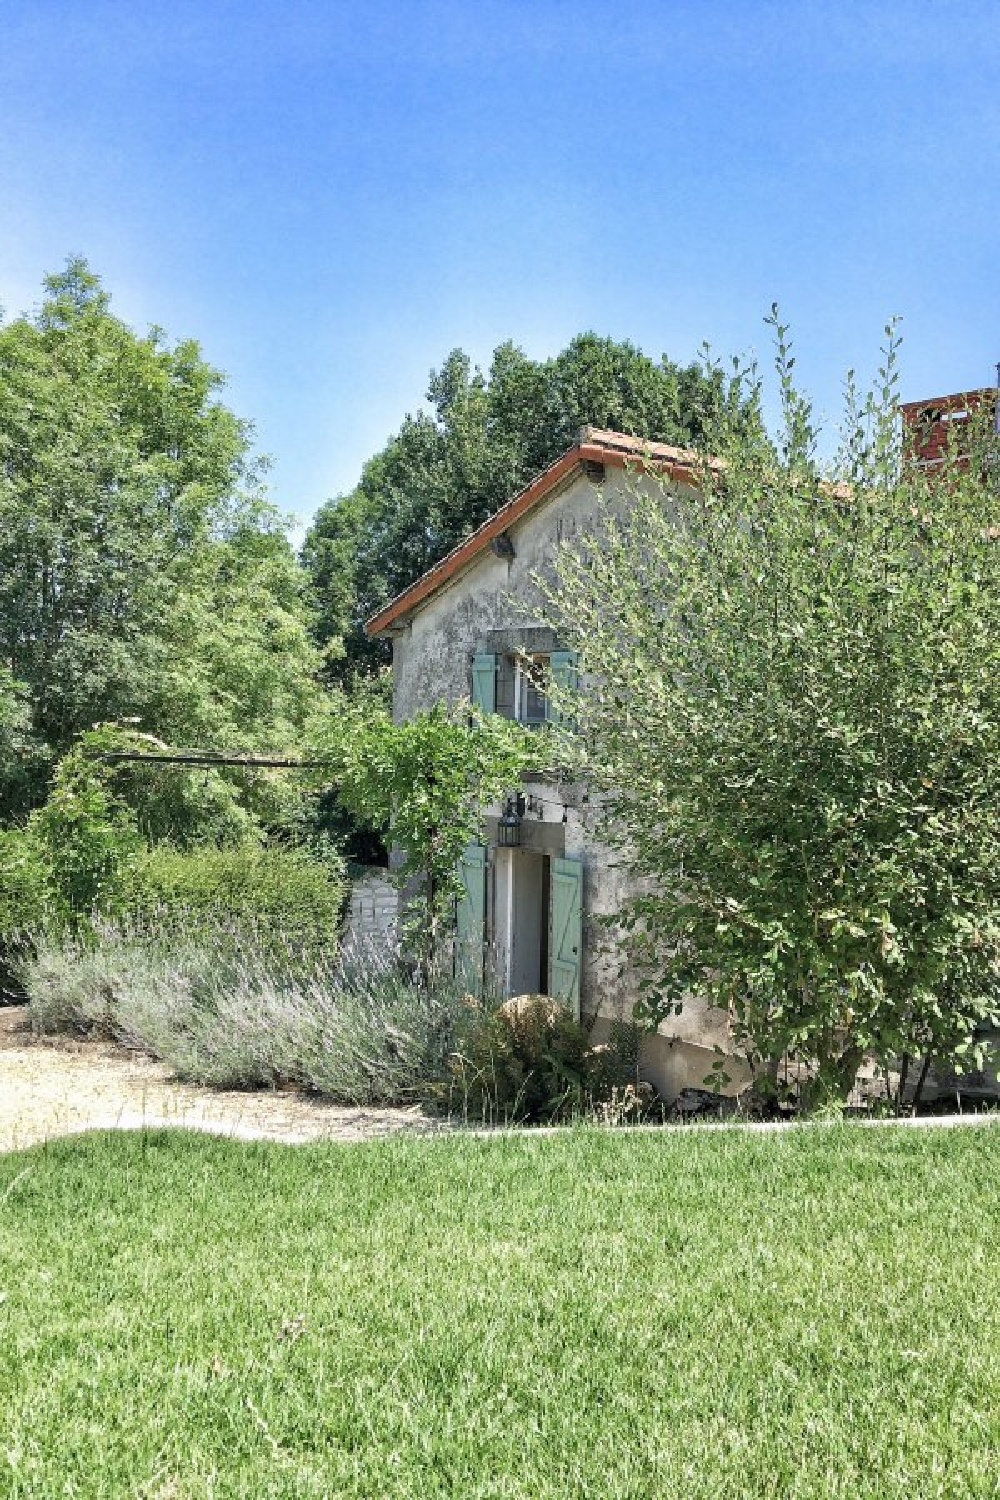 Gorgeous French farmhouse rustic exterior with lavender in Western France by Vivi et Margot. #frenchfarmhouse #countryhouses #greenshutters #frenchcountryhome #frenchhouse